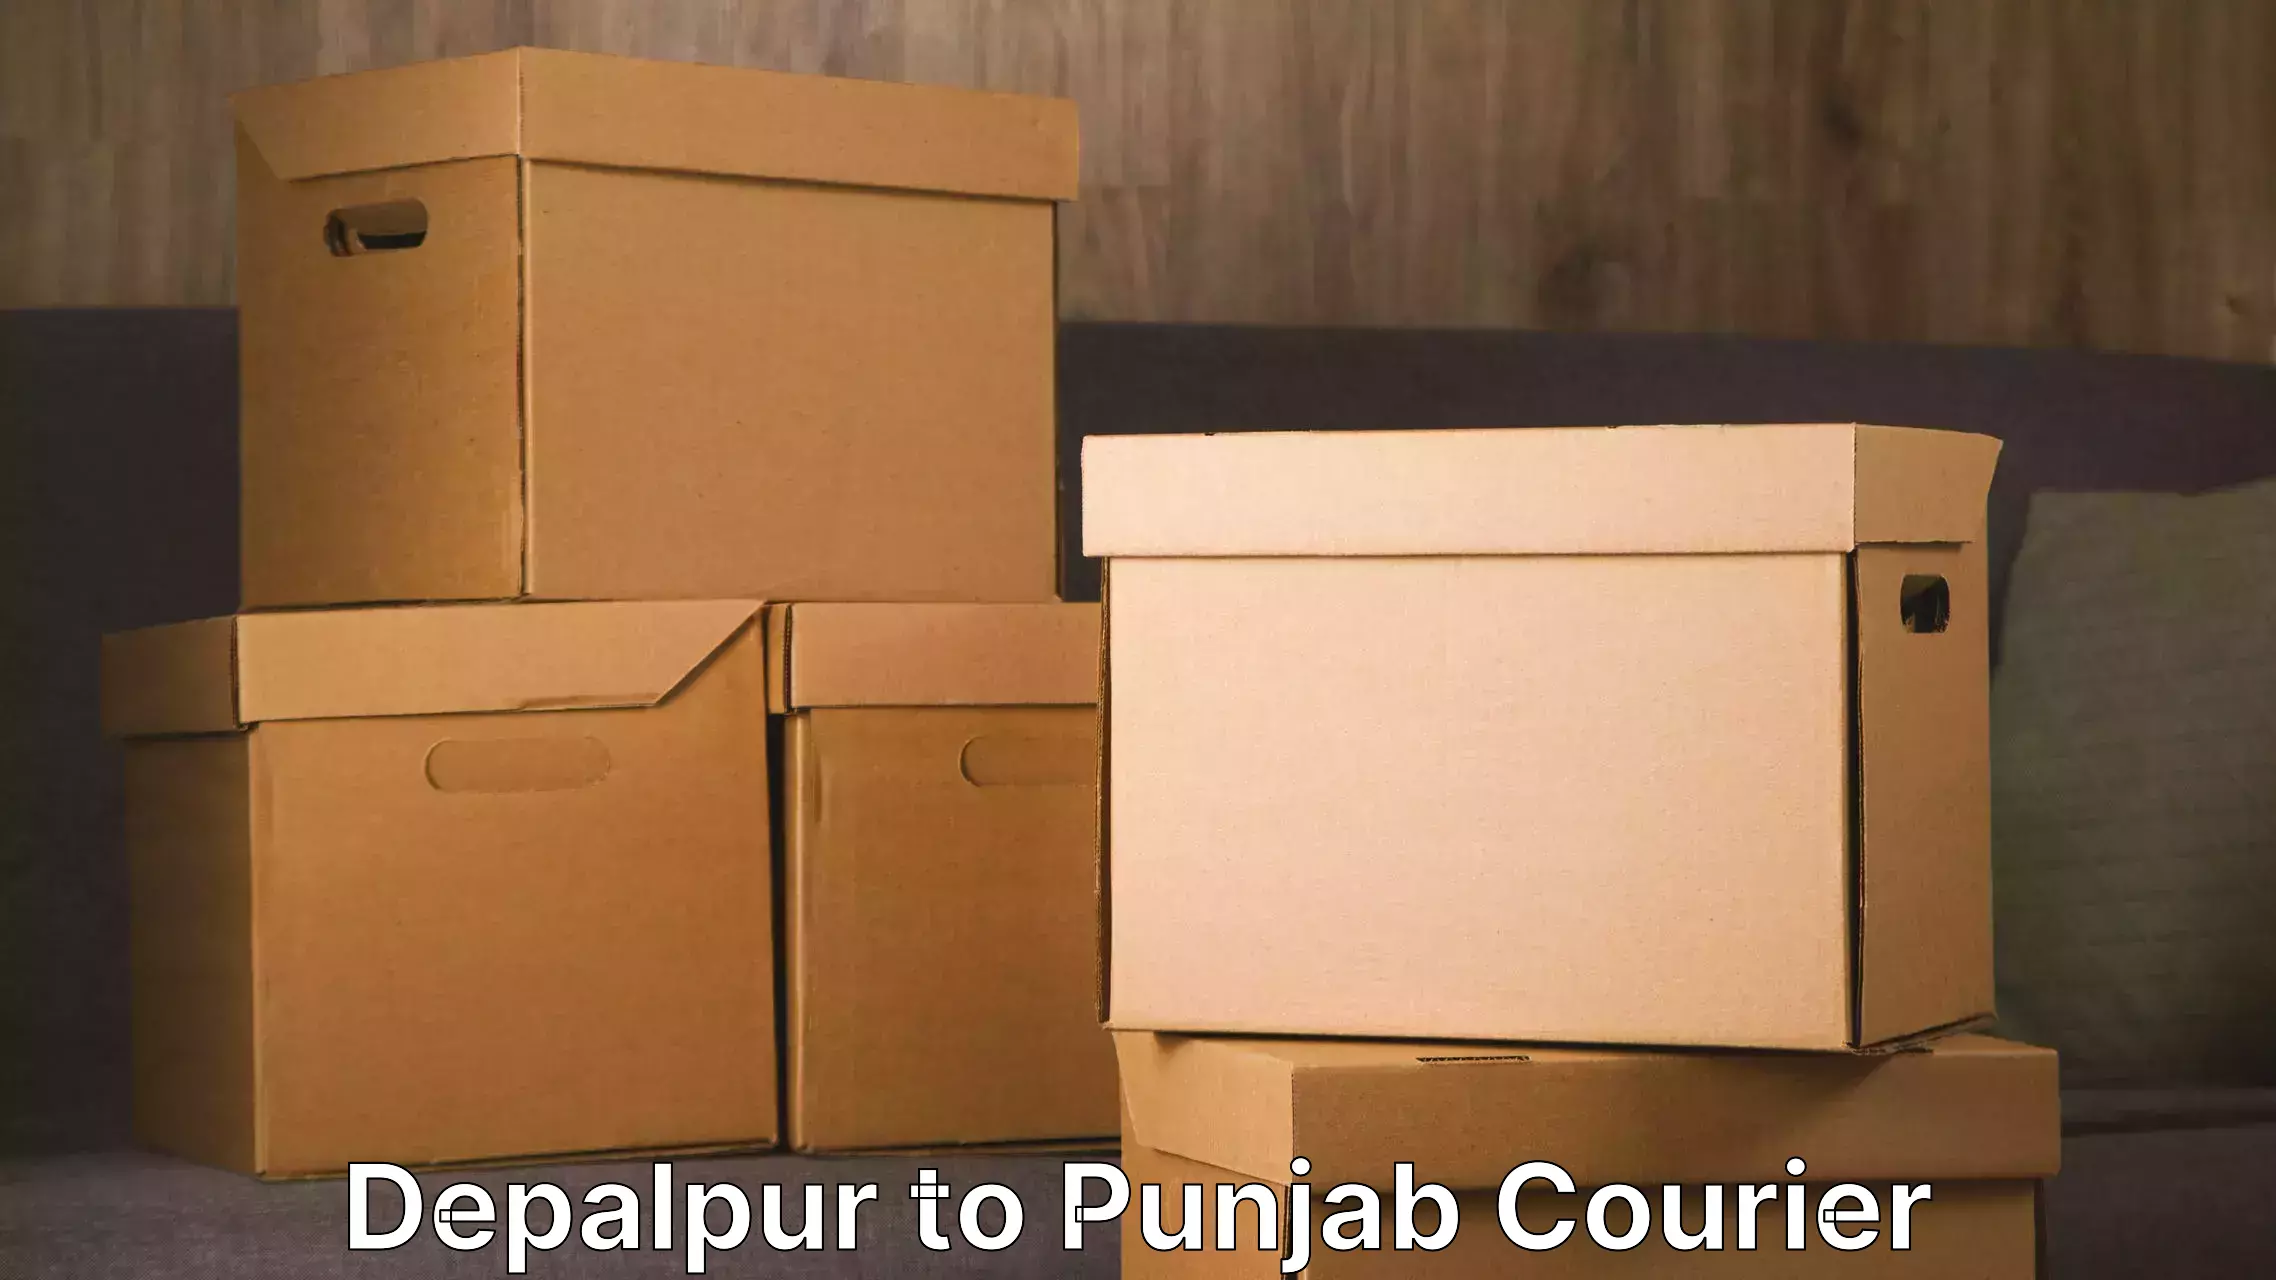 Professional furniture movers Depalpur to Mohali